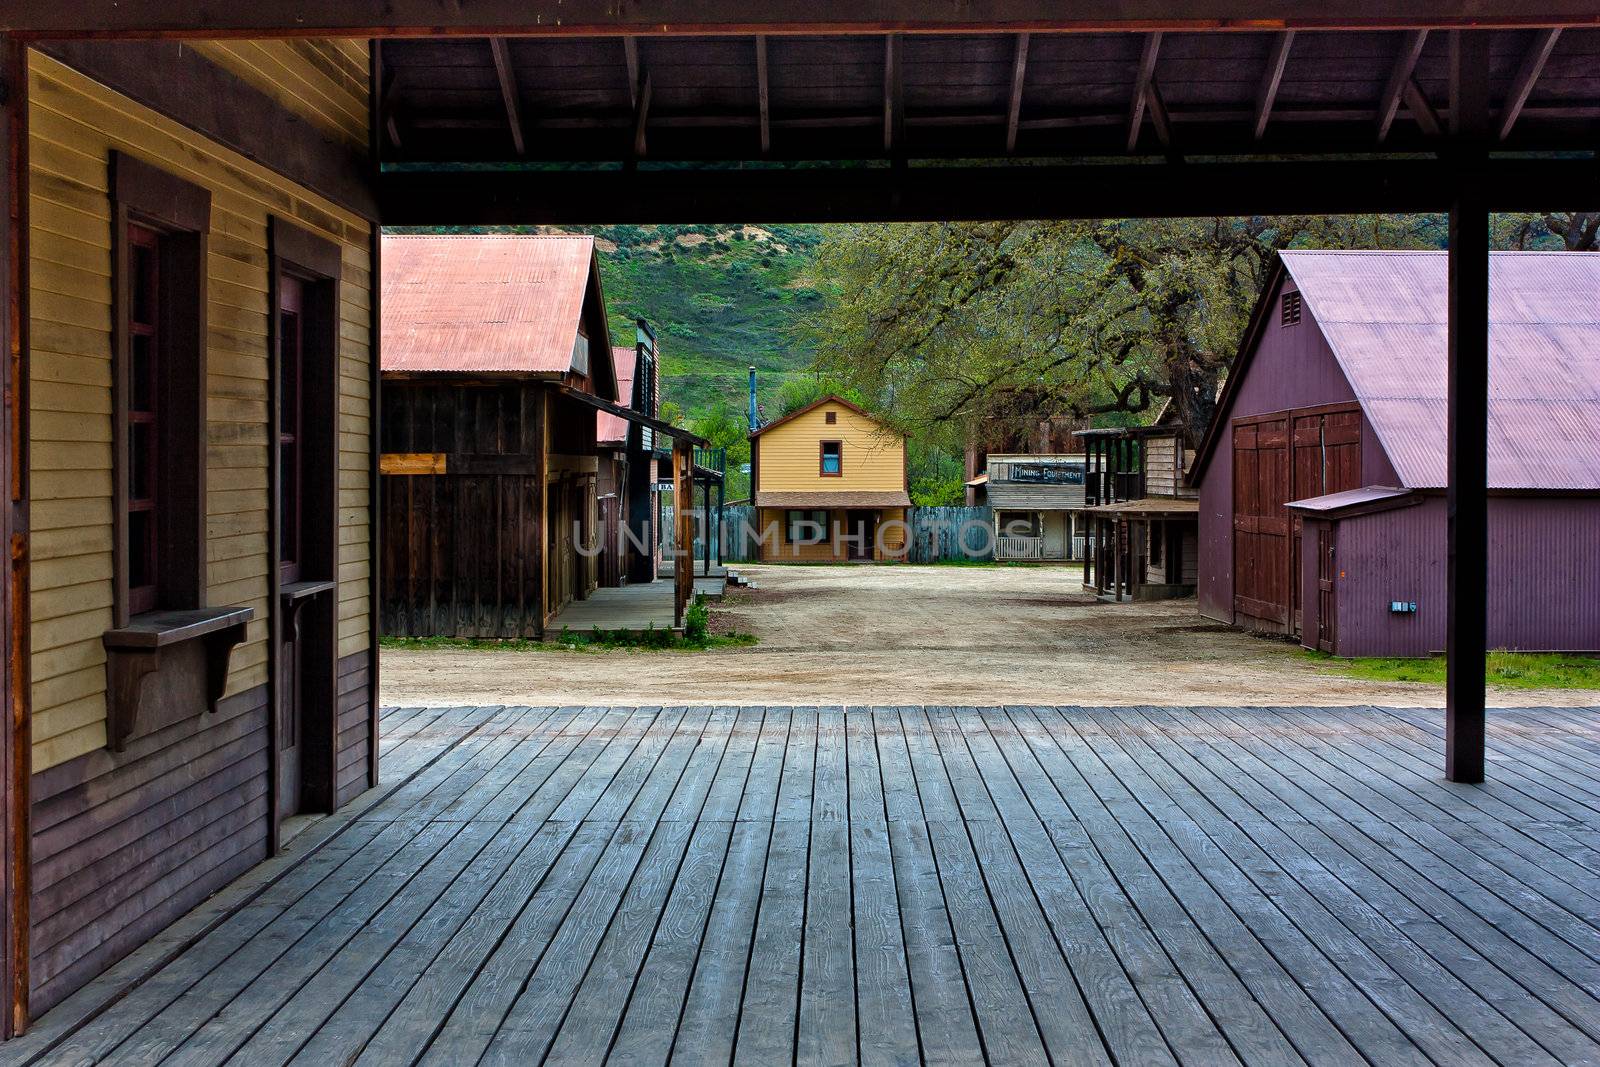 An old western town in California.